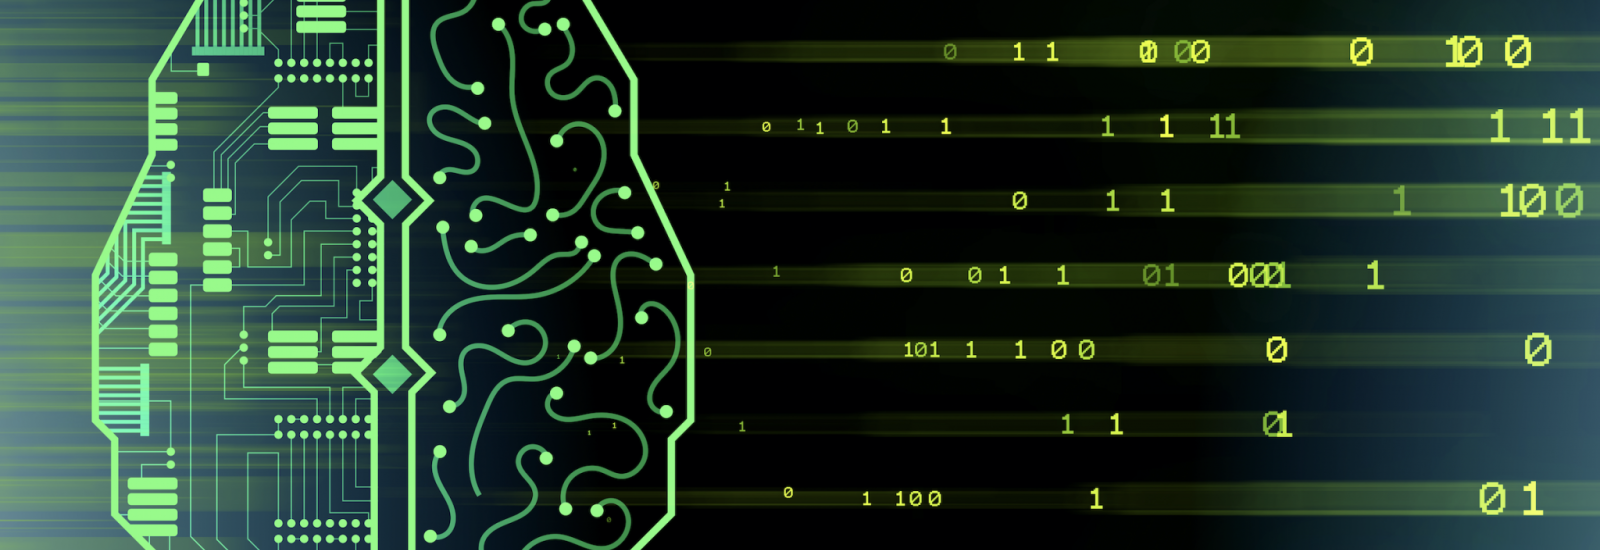 A depiction of a "bionic brain" where logic systems and circuits are mapped onto the outline of a brain. There is also some binary information displayed.